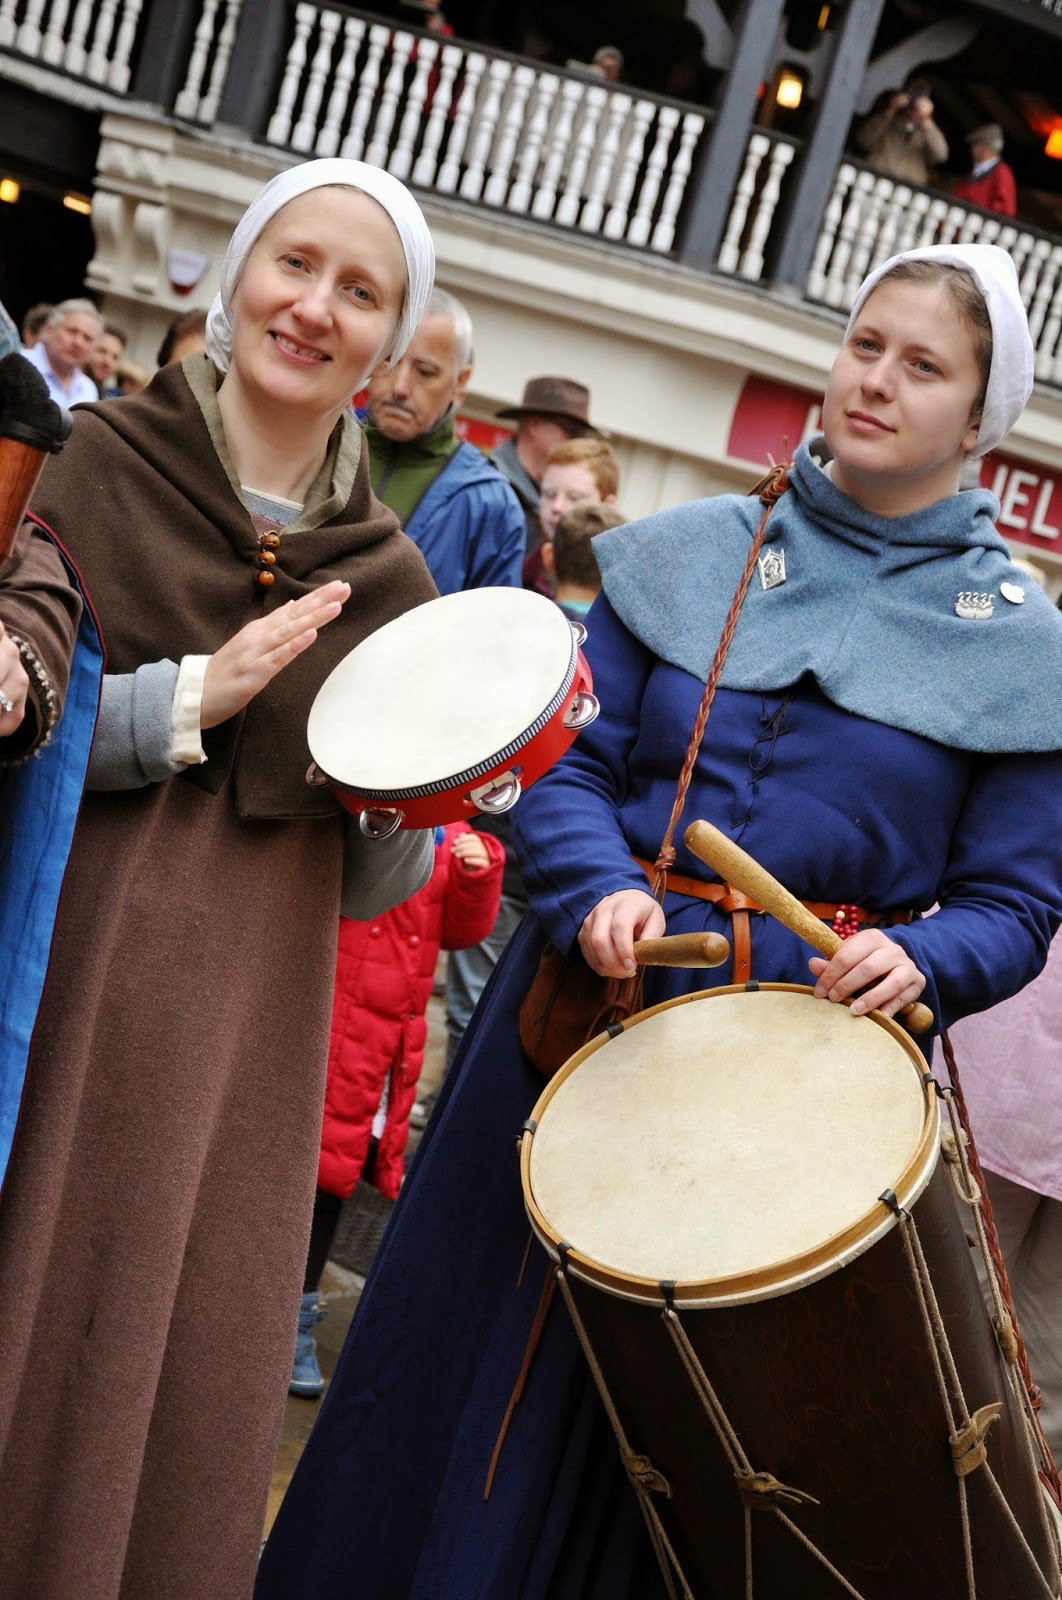 Pilgrims and Posies: Medieval Merriment with the Minstrels